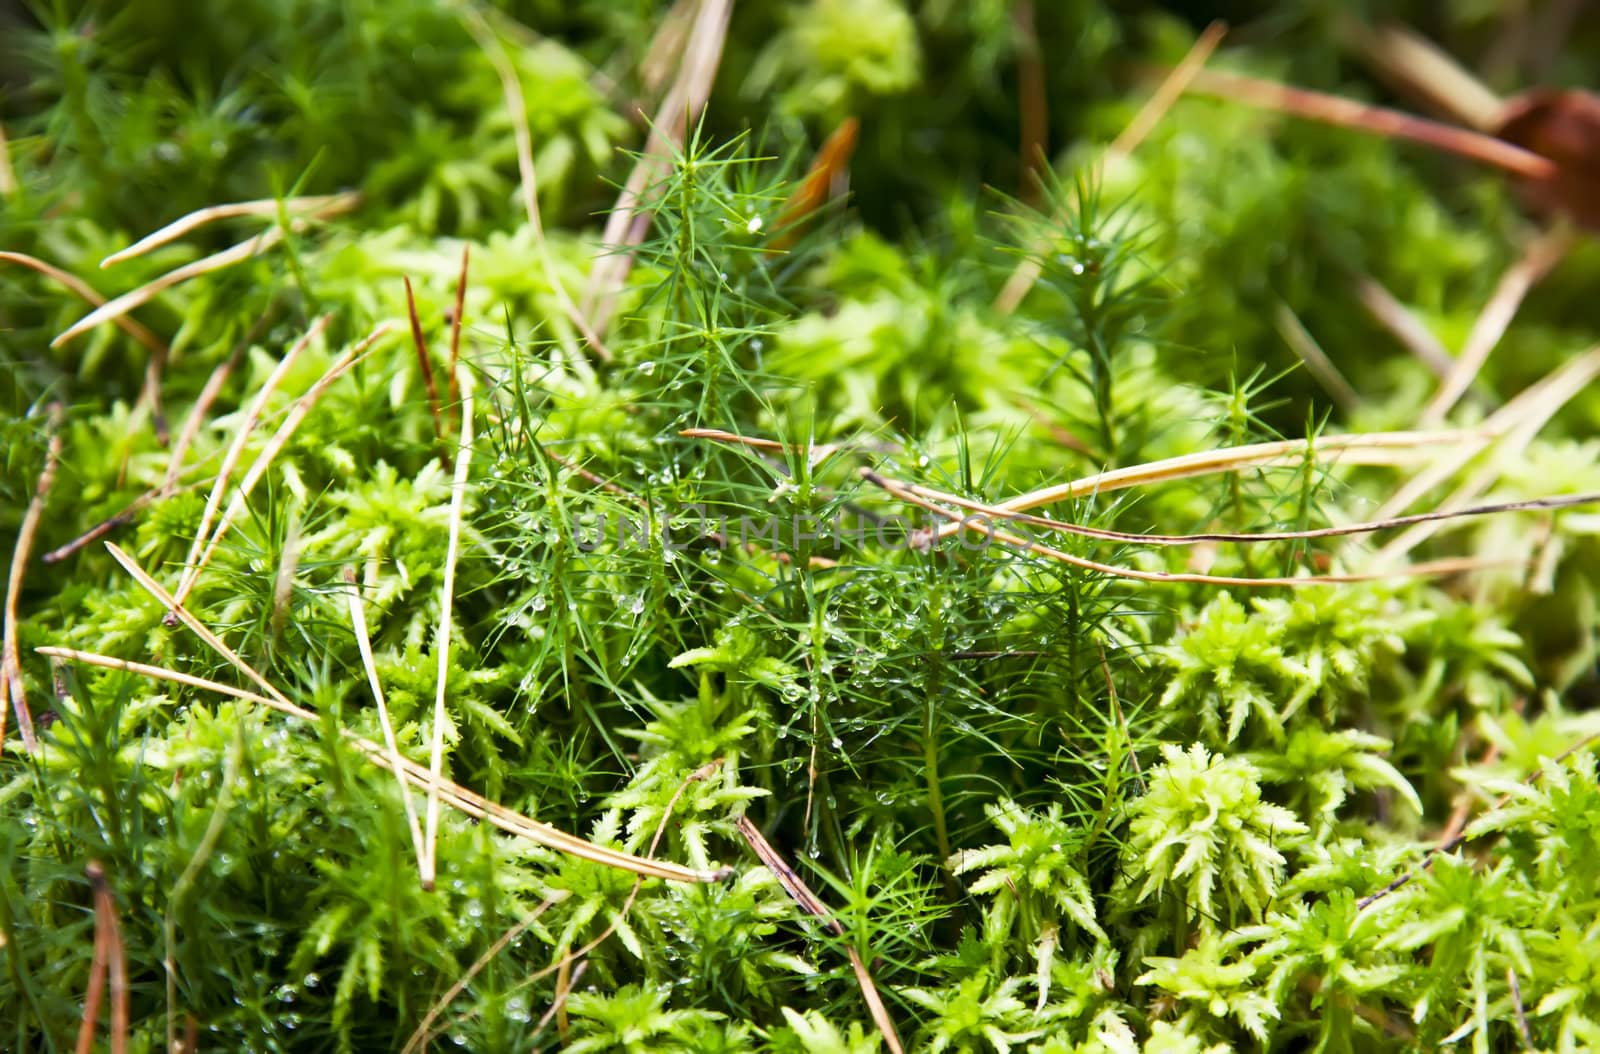 Green moss with drops of dew on it